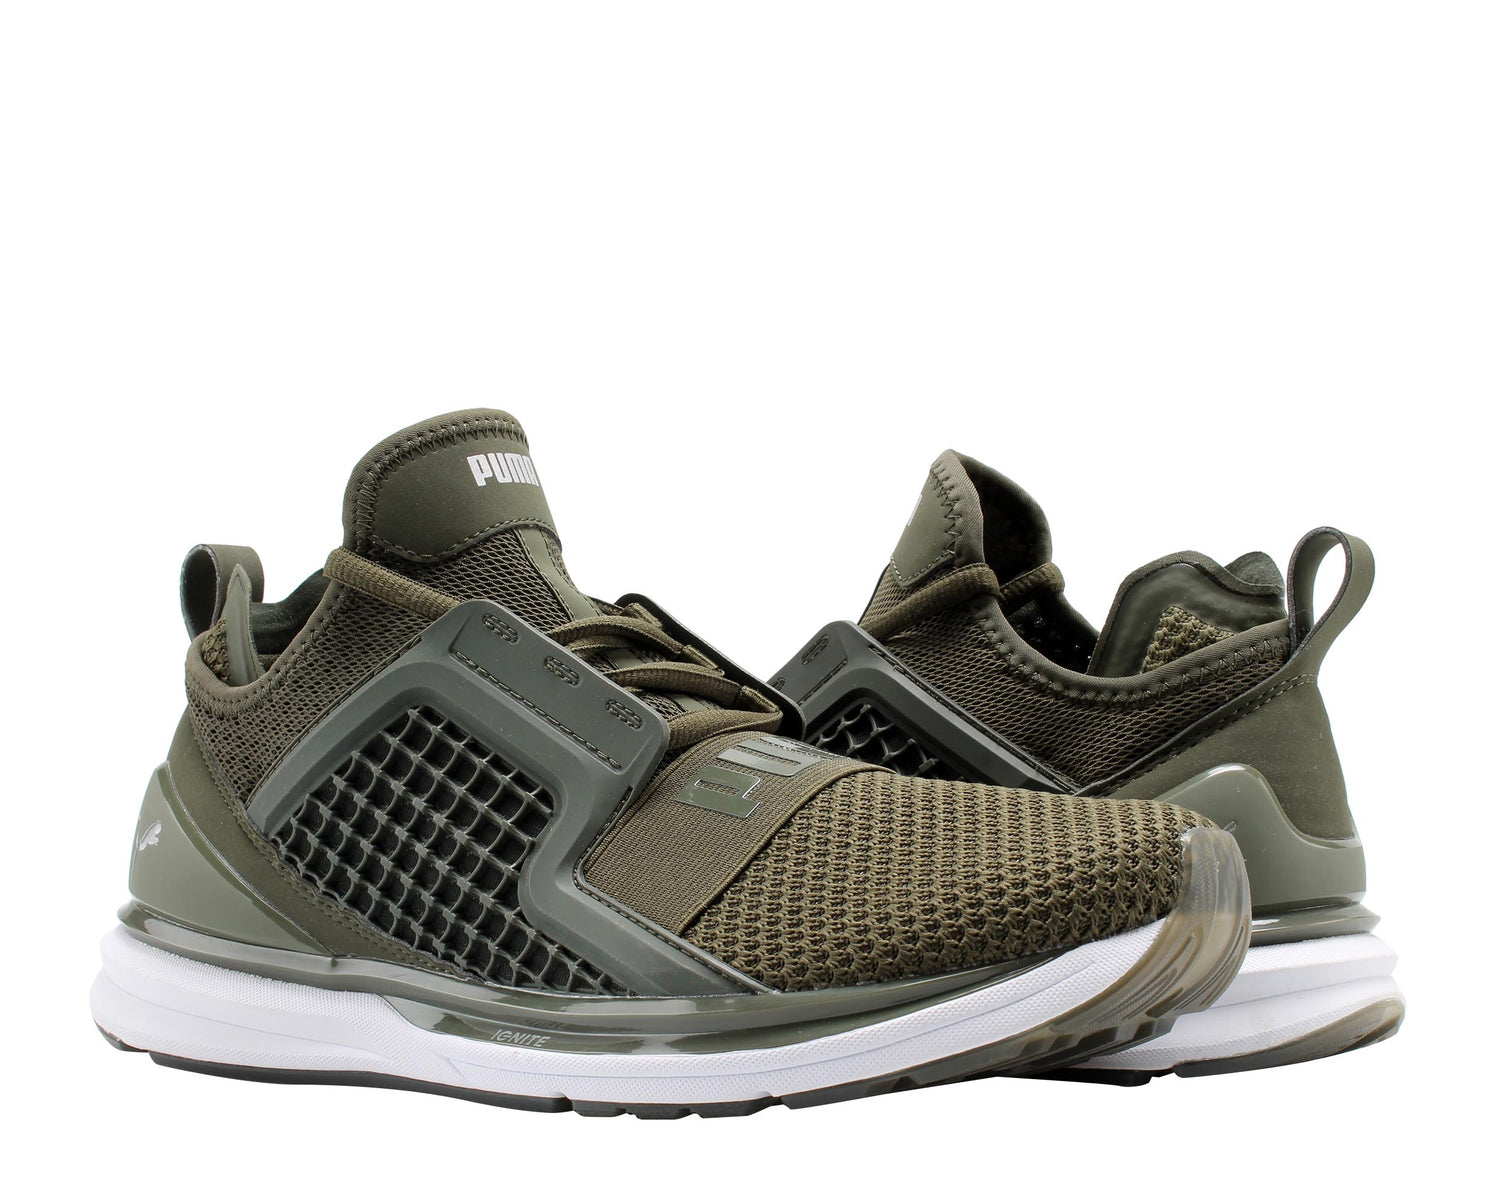 Puma IGNITE Limitless Weave Men's Running Shoes